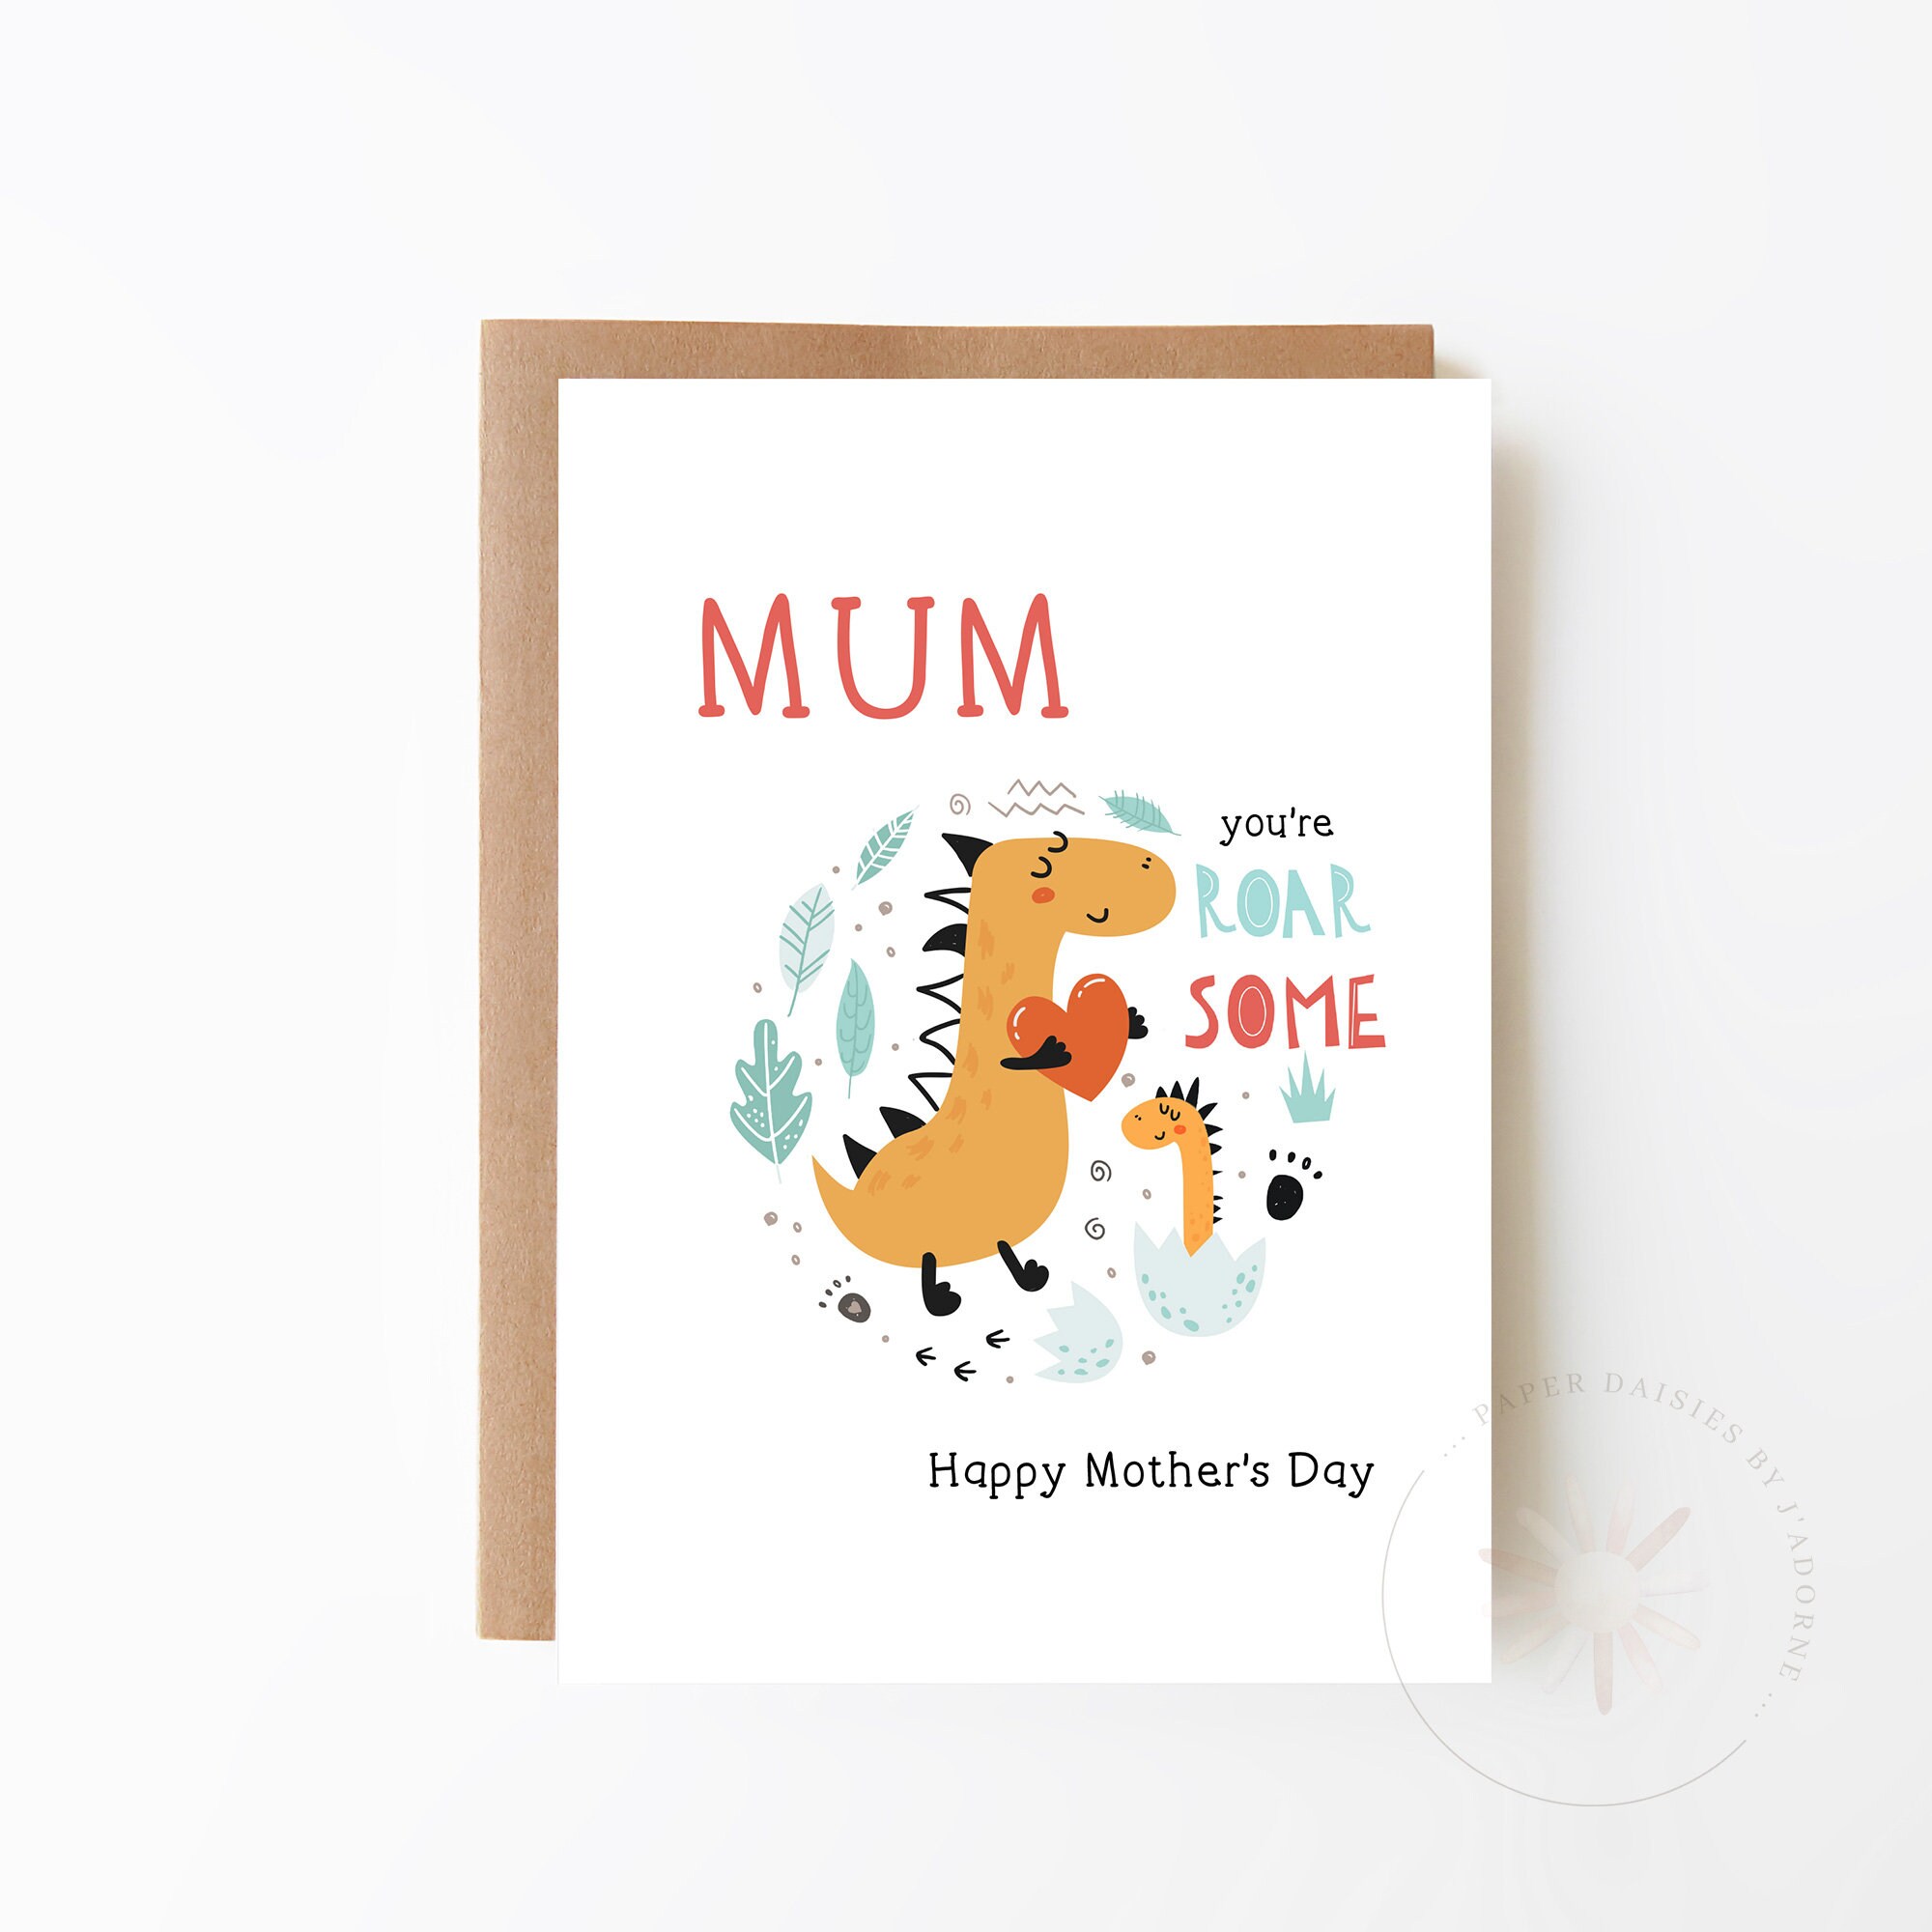 Embroidered Dinosaur You’re Roarsome Card